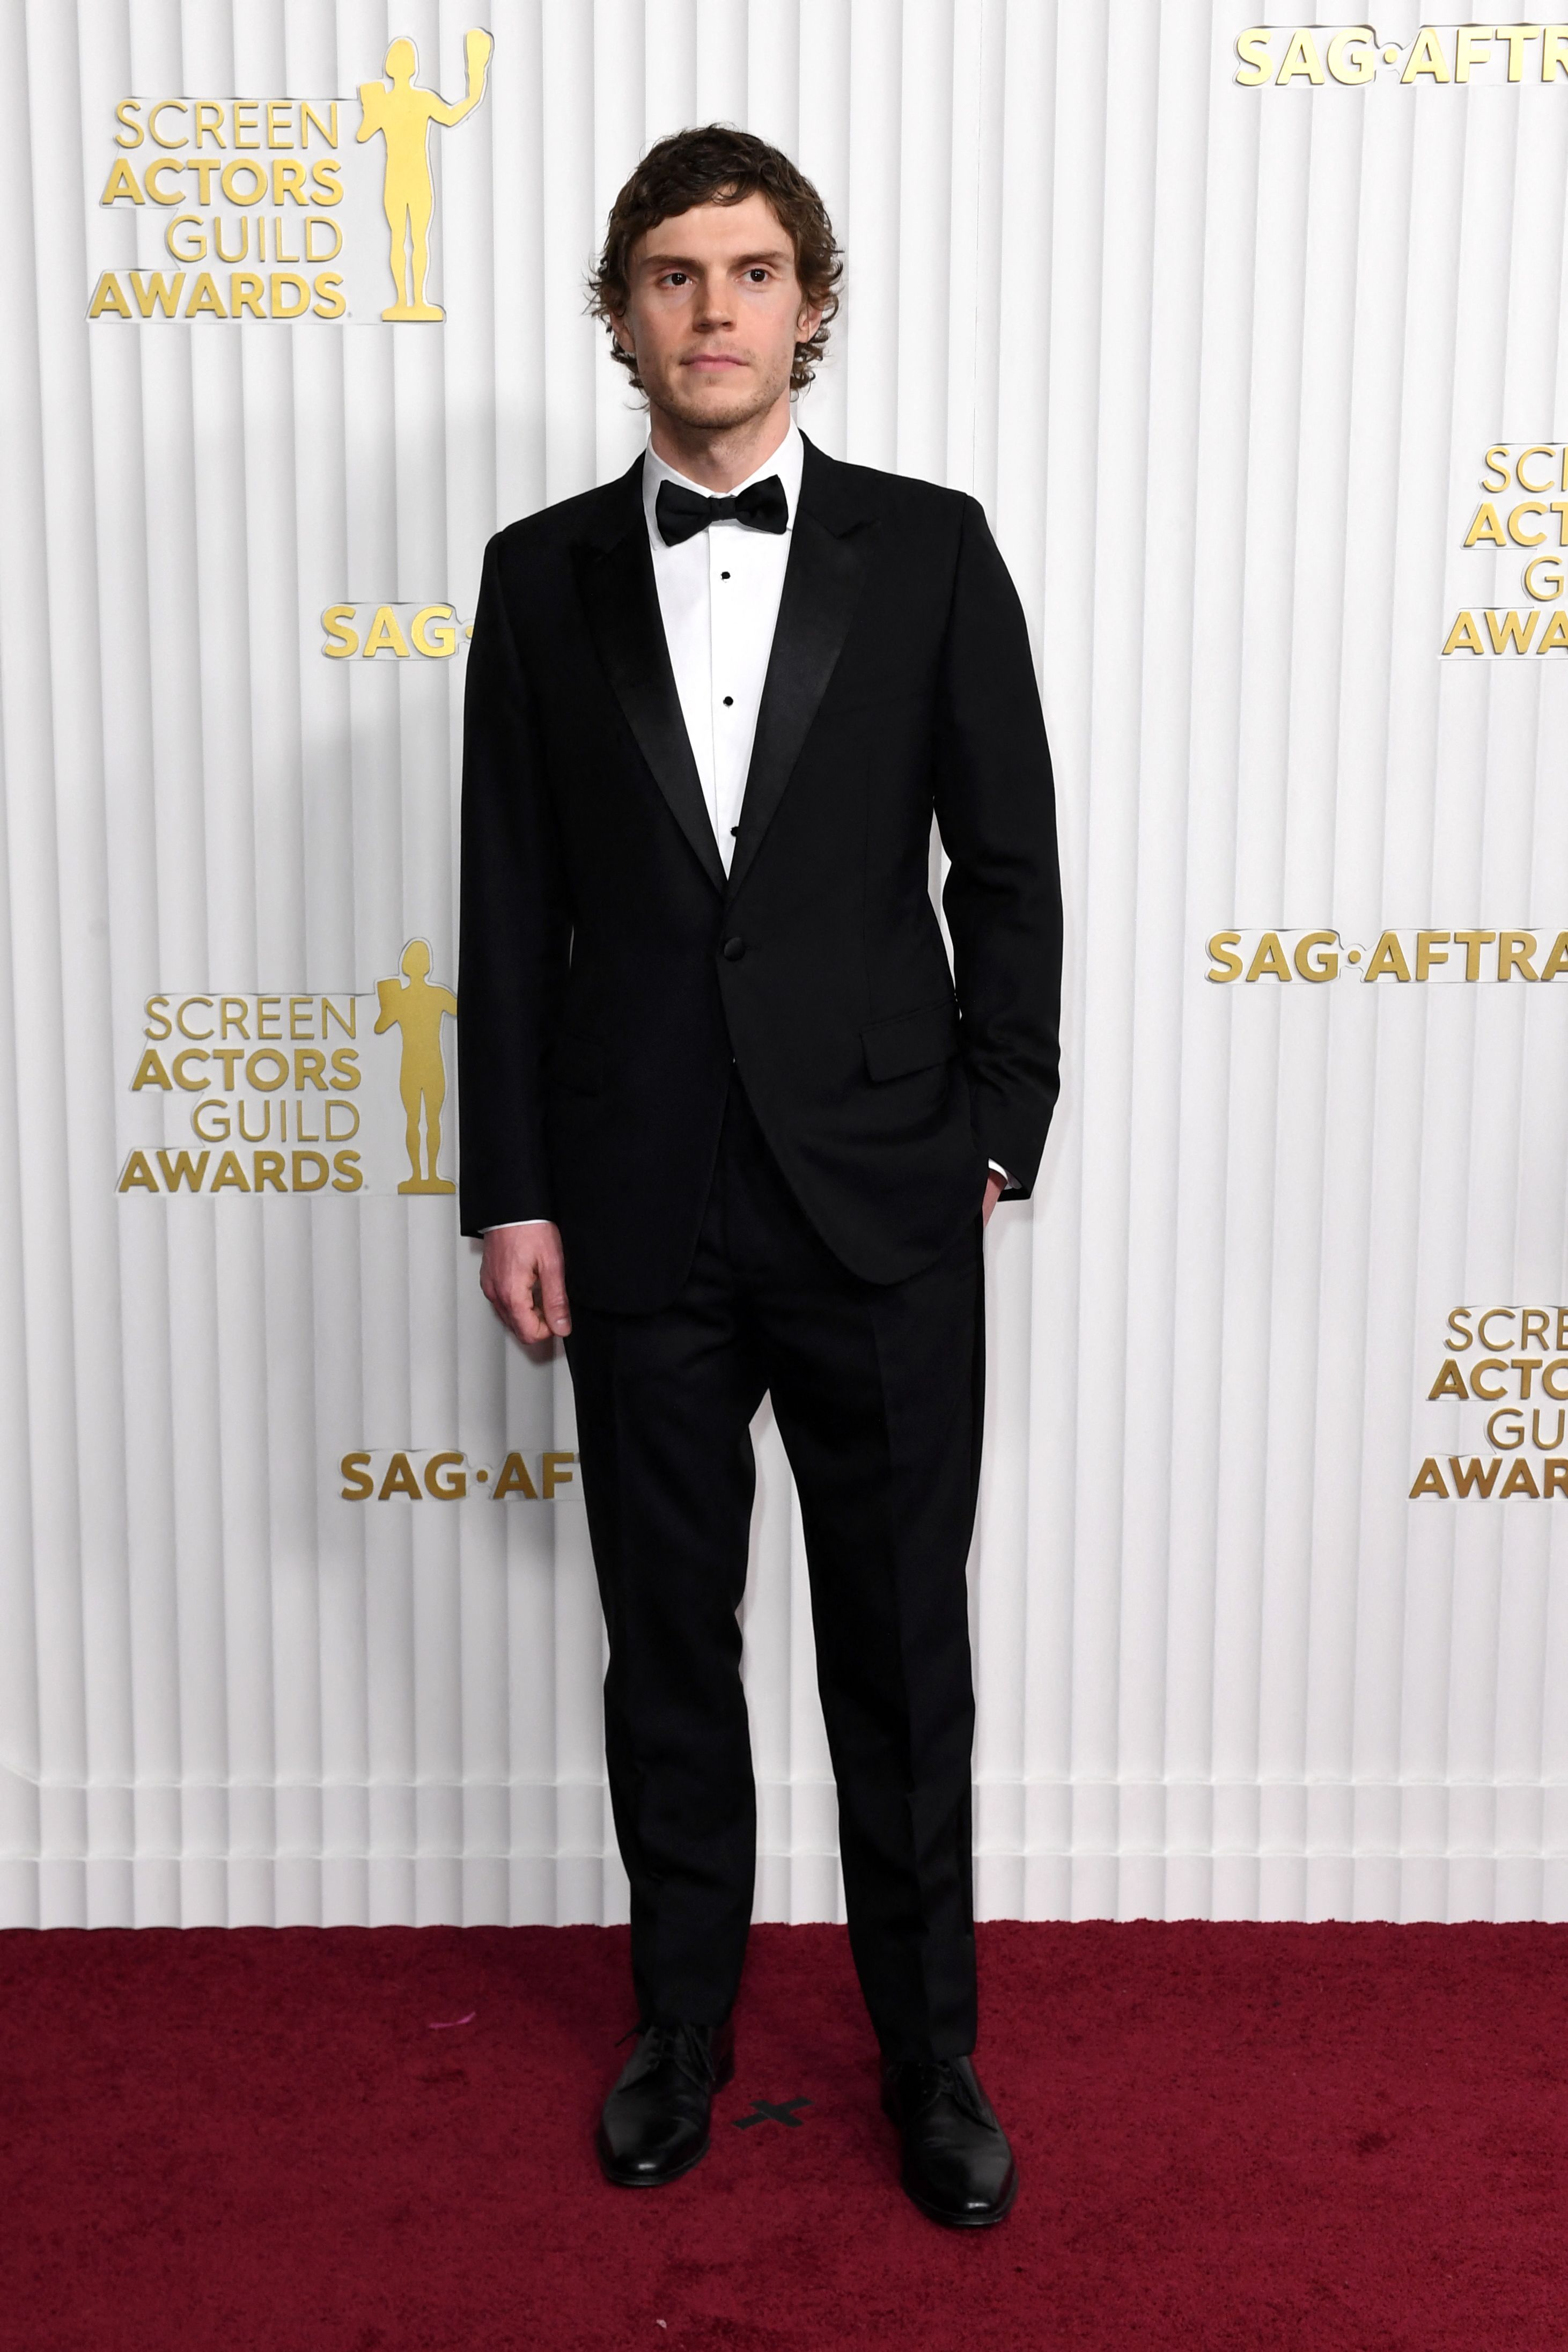 US actor Evan Peters arrives for the 29th Screen Actors Guild Awards at the Fairmont Century Plaza in Century City, California, on February 26, 2023. | Source: Getty Images